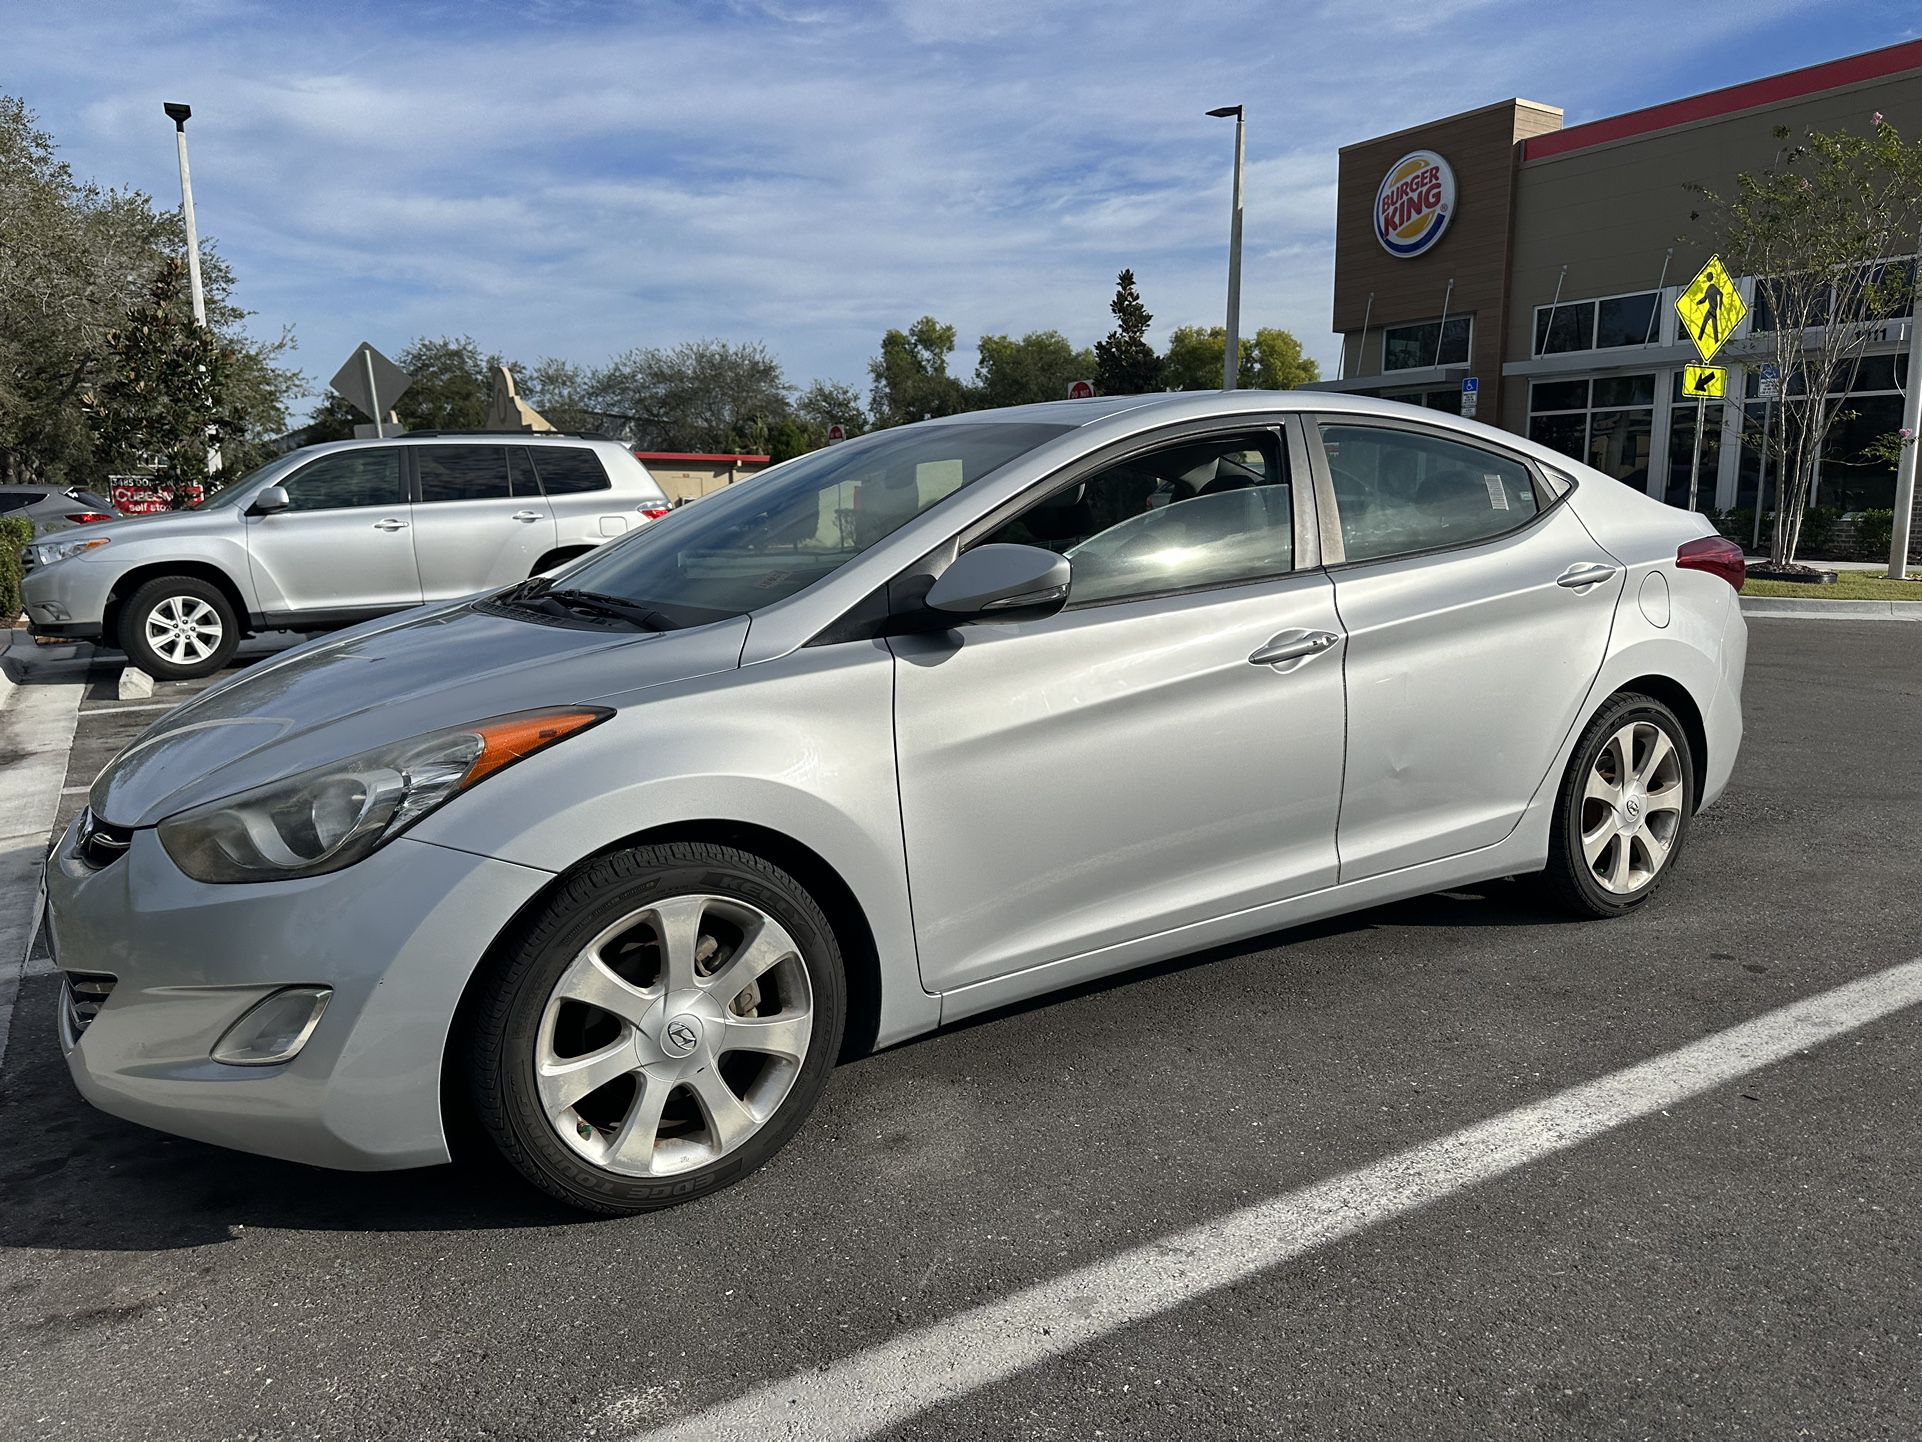 Hyundai Elantra! Need A Car? Need A Break? I don’t Care About The Credit! 